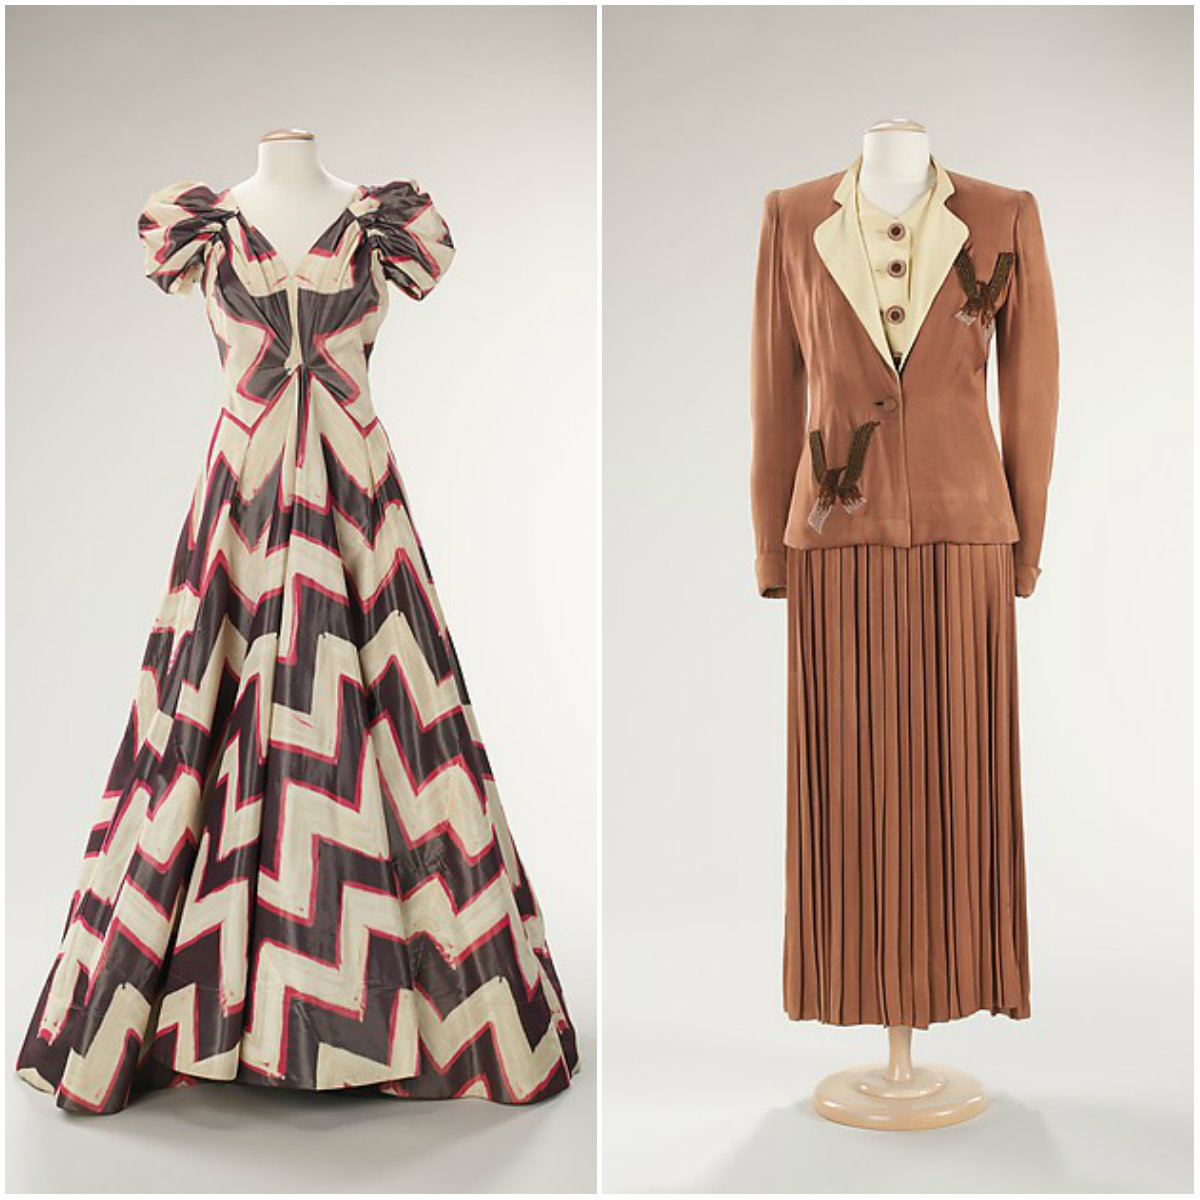 1940s. 'Féminité' dress and Ensemble. Silk, synthetic, beads. metmuseum